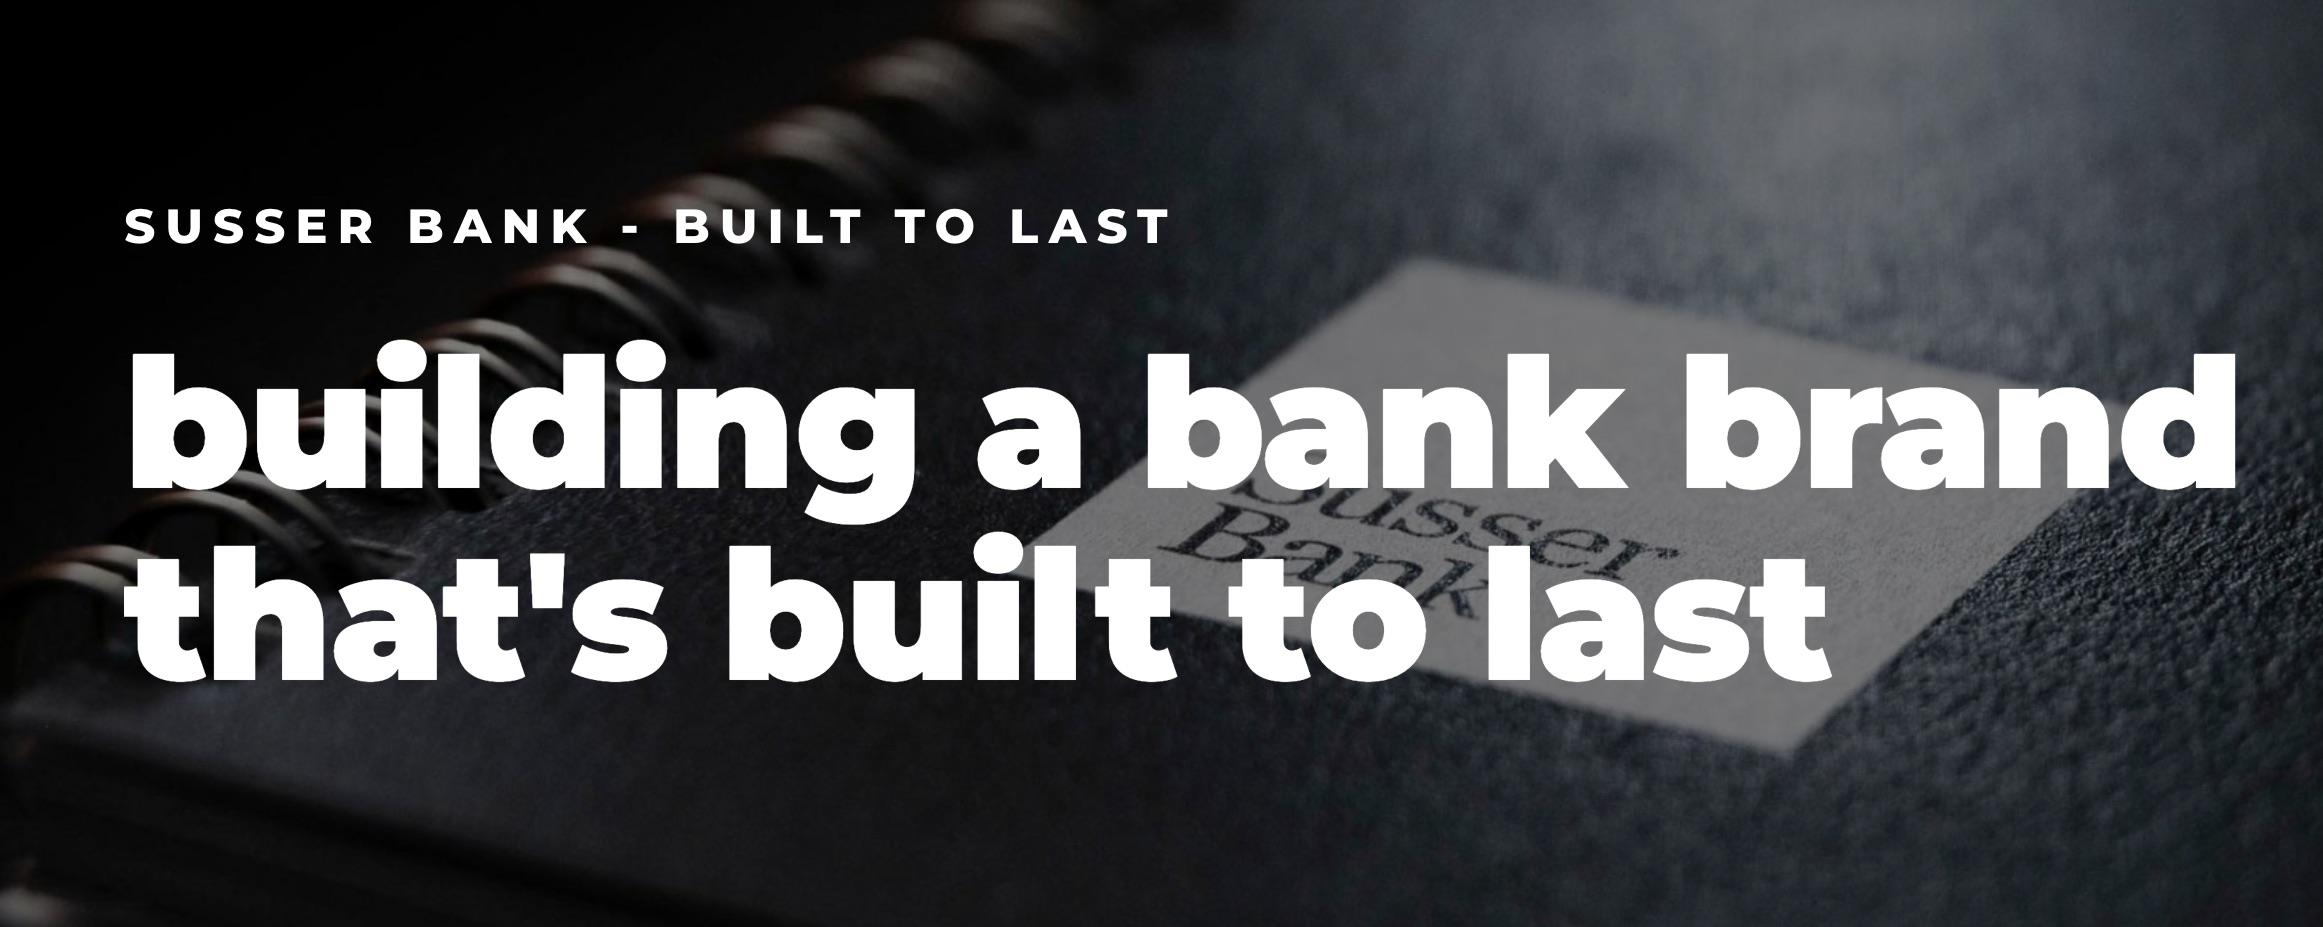 Buidling a Bank Brand That